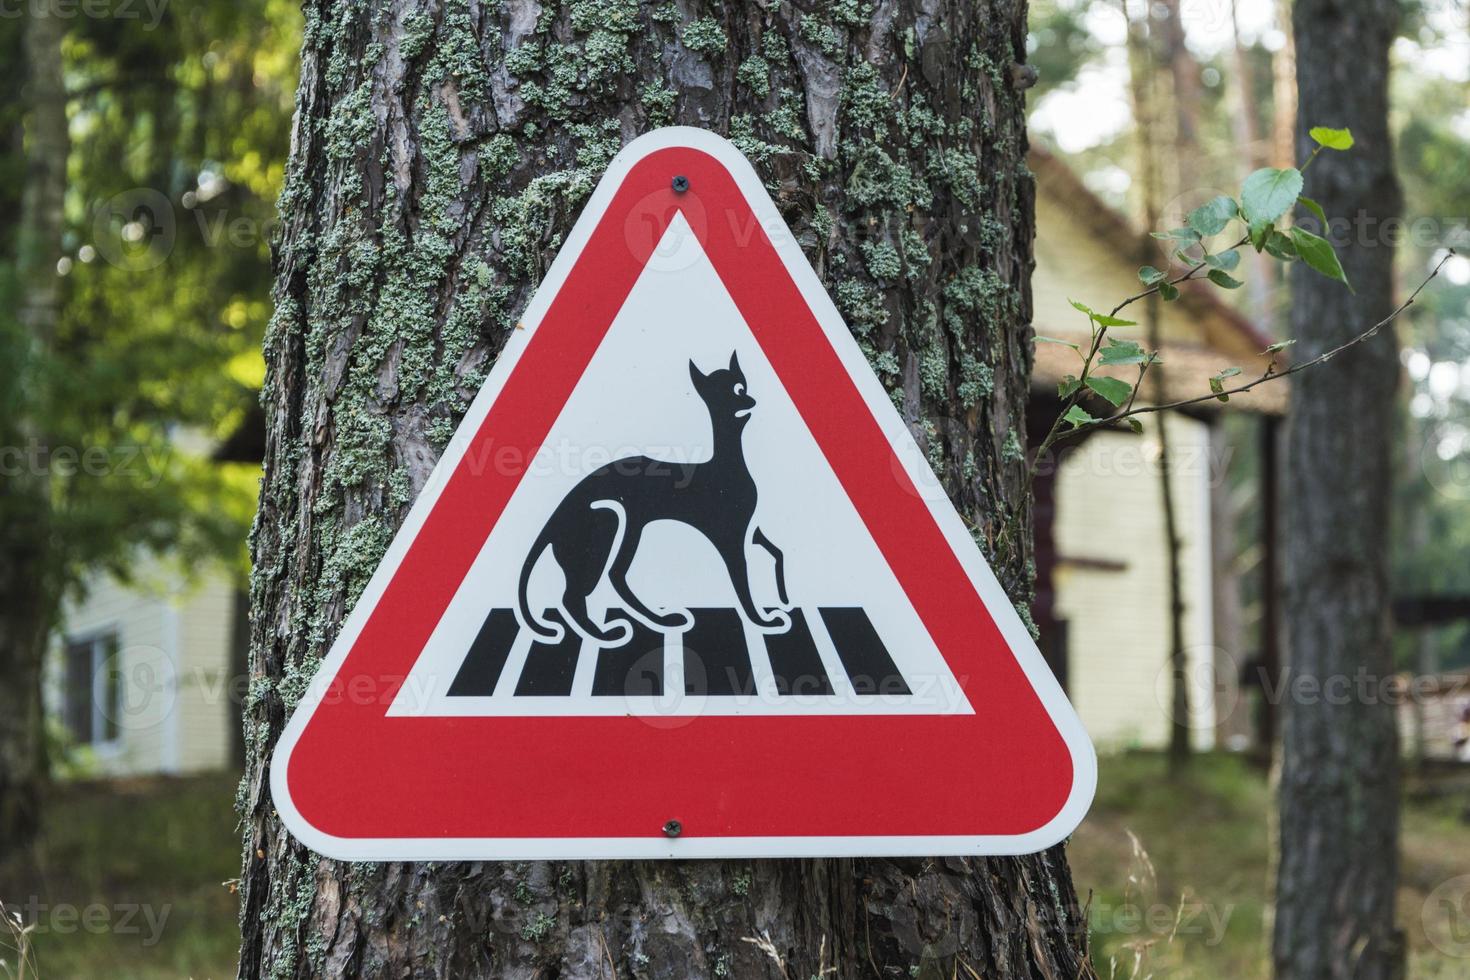 Warning Sign Beware of Cats, Playful Sign, Red Triangular Road Sign Warning about Cats photo